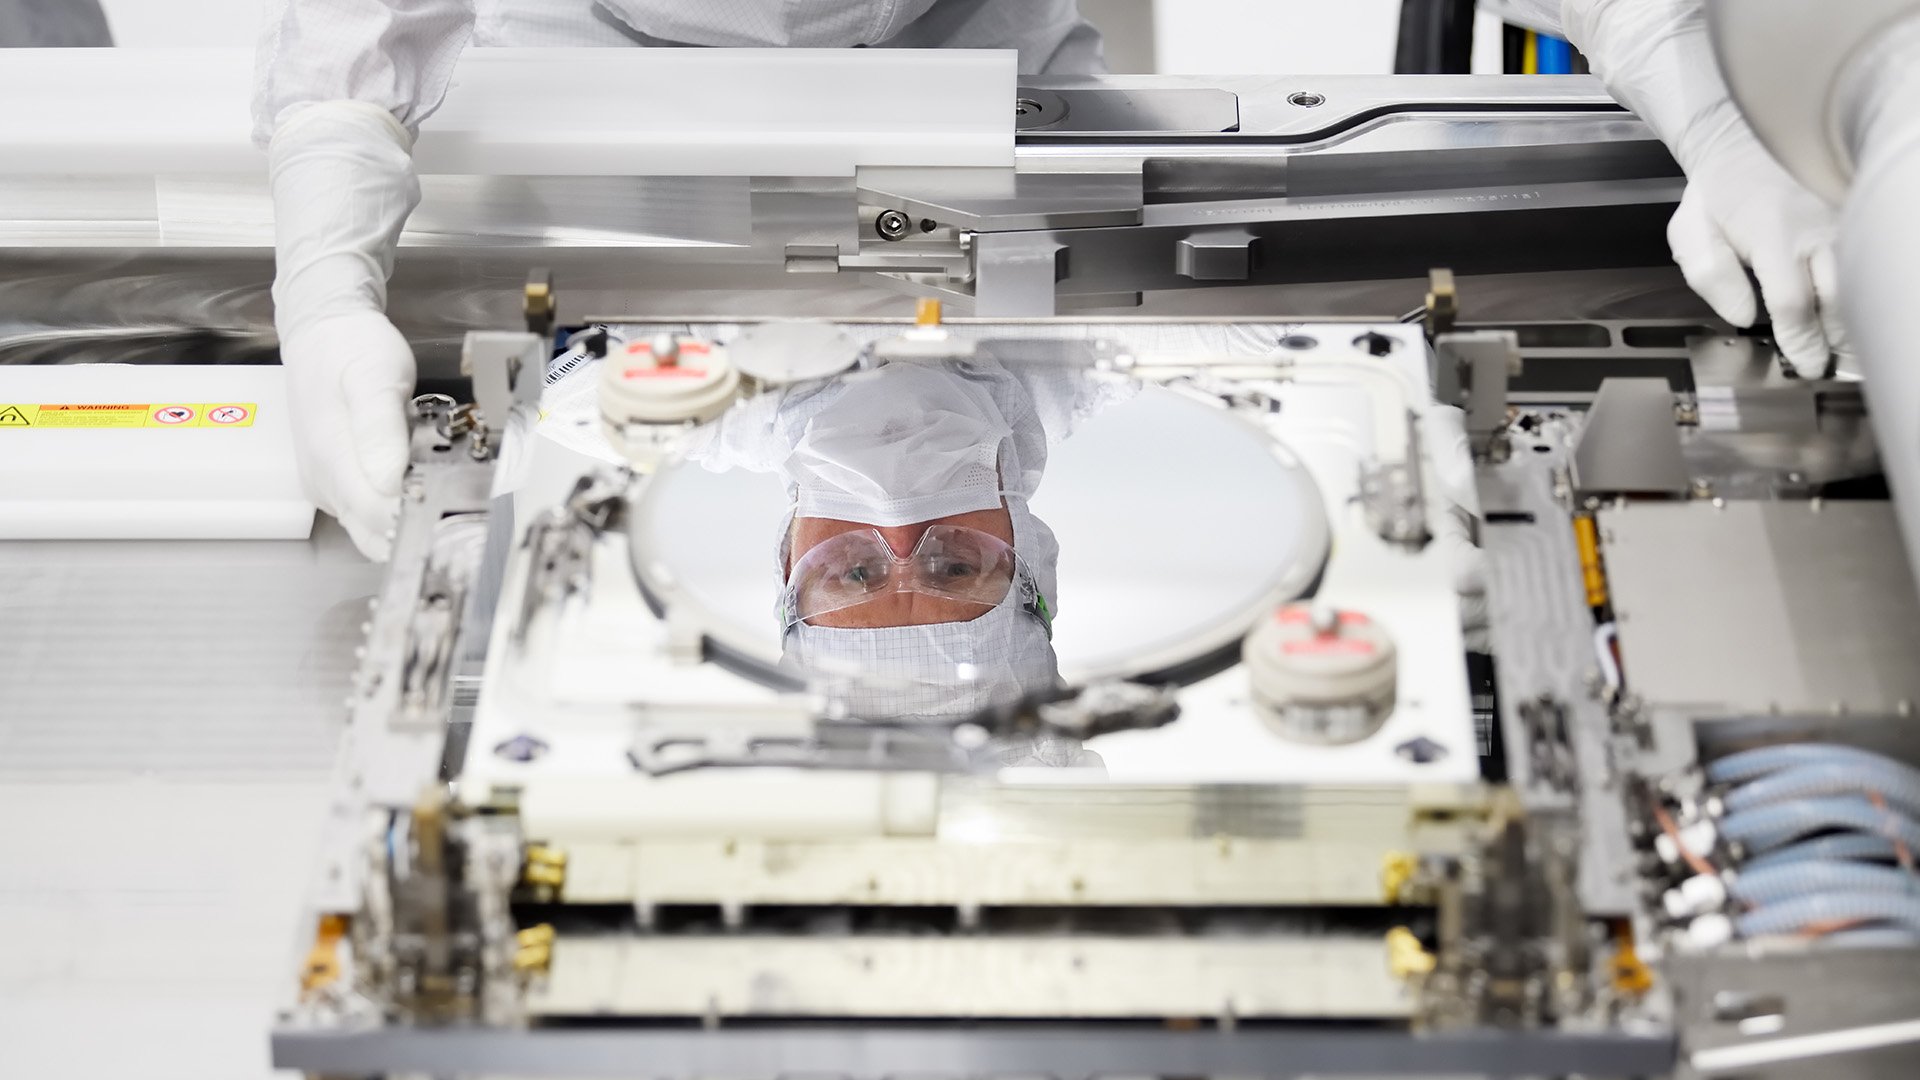 Reflection of engineer in protective clothing looking at silicon wafer